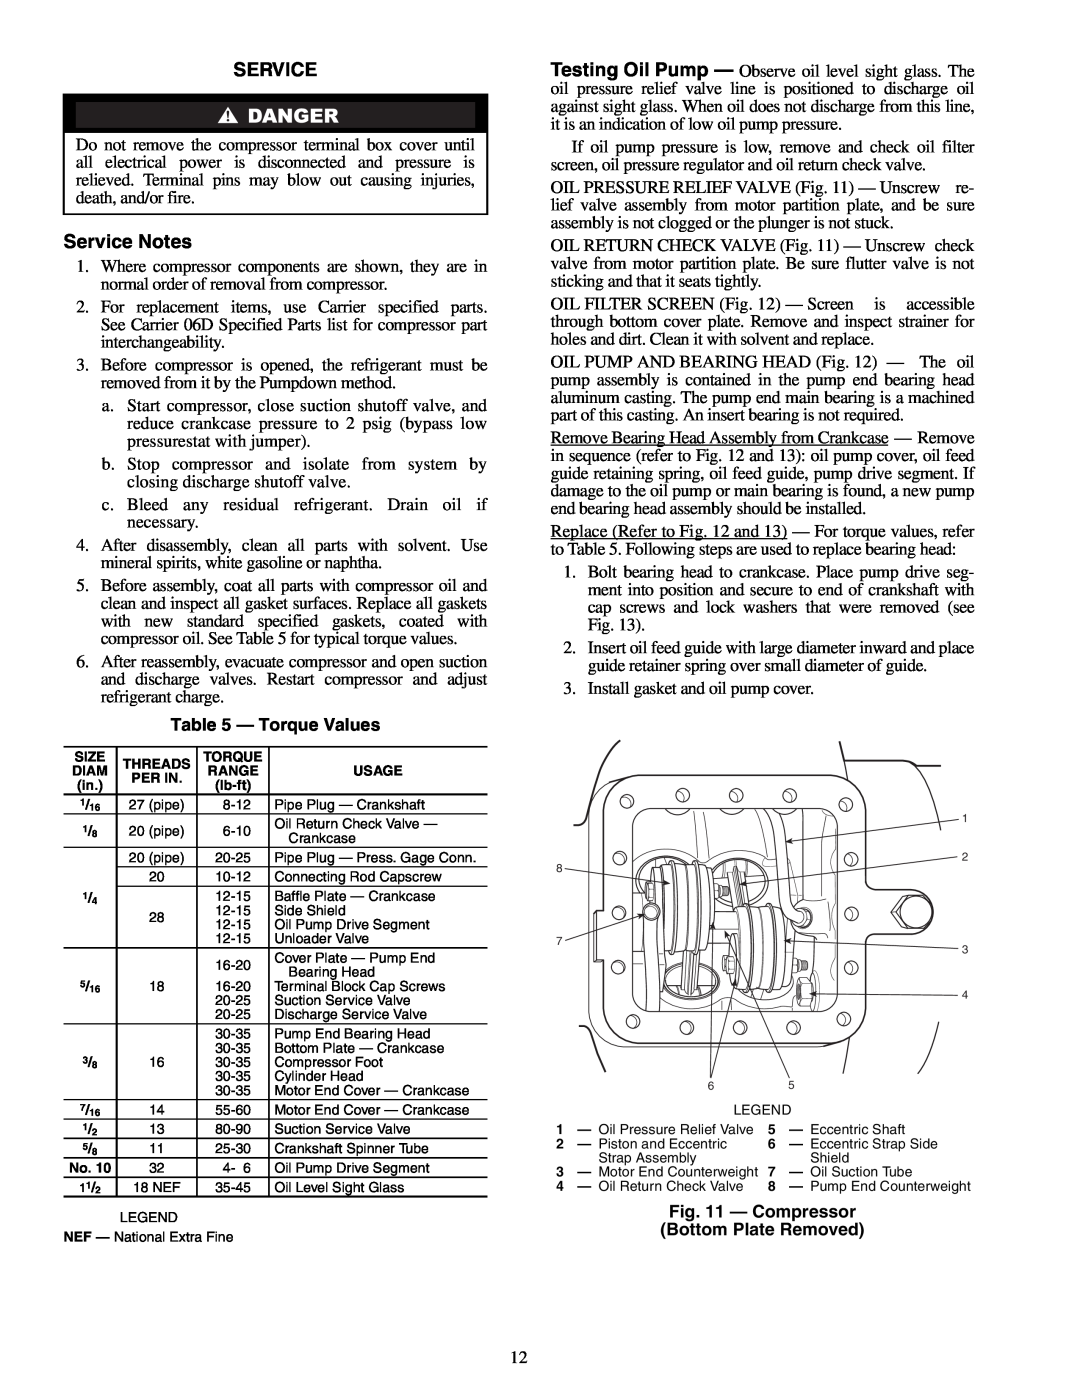 Carrier 06D specifications Service Notes, Torque Values, Compressor Bottom Plate Removed 